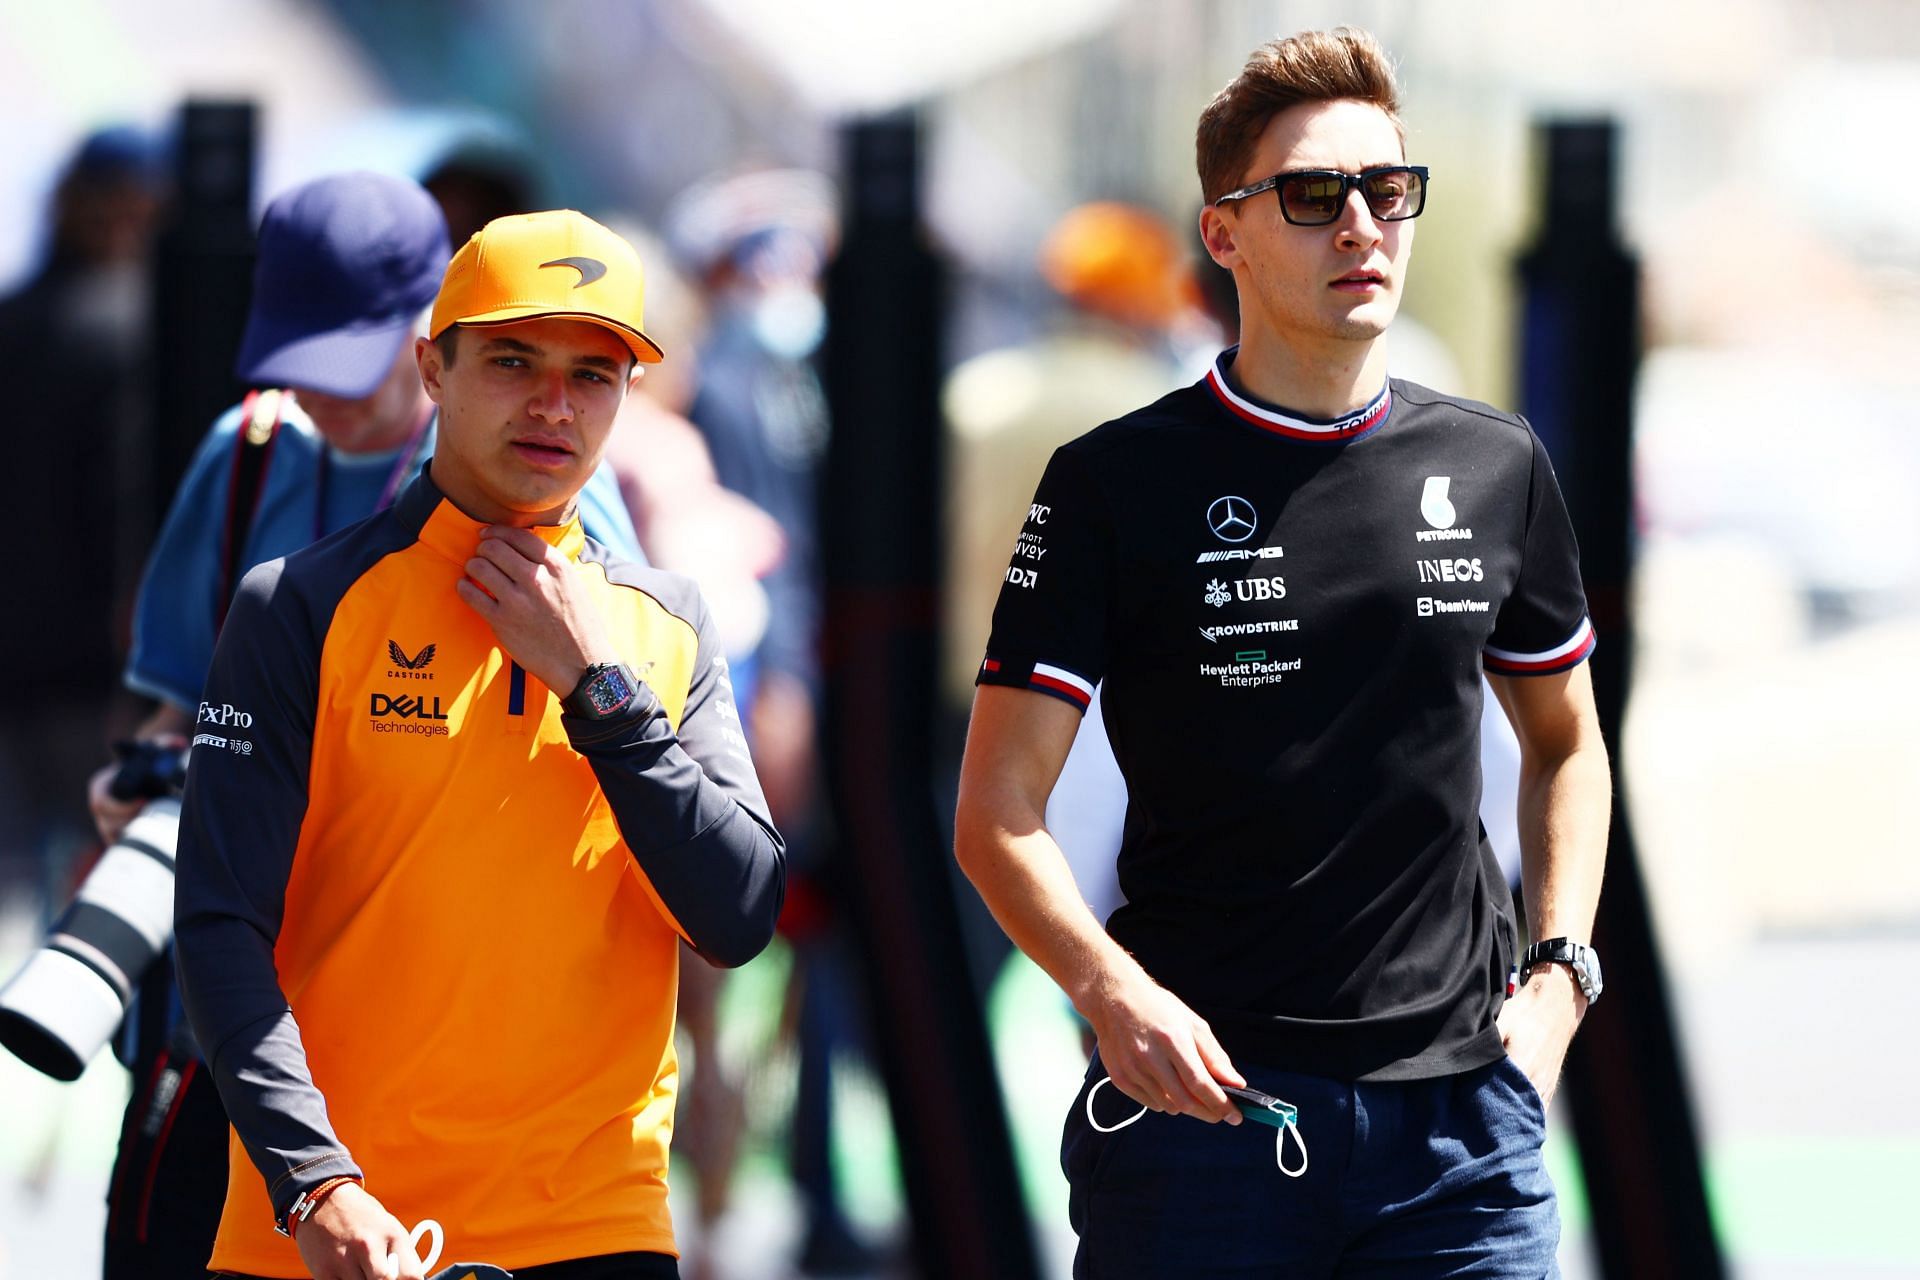 McLaren&#039;s Lando Norris (left) and Mercedes&#039; George Russell walk in the paddock during the 2022 F1 Saudi Arabian GP weekend. (Photo by Mark Thompson/Getty Images)